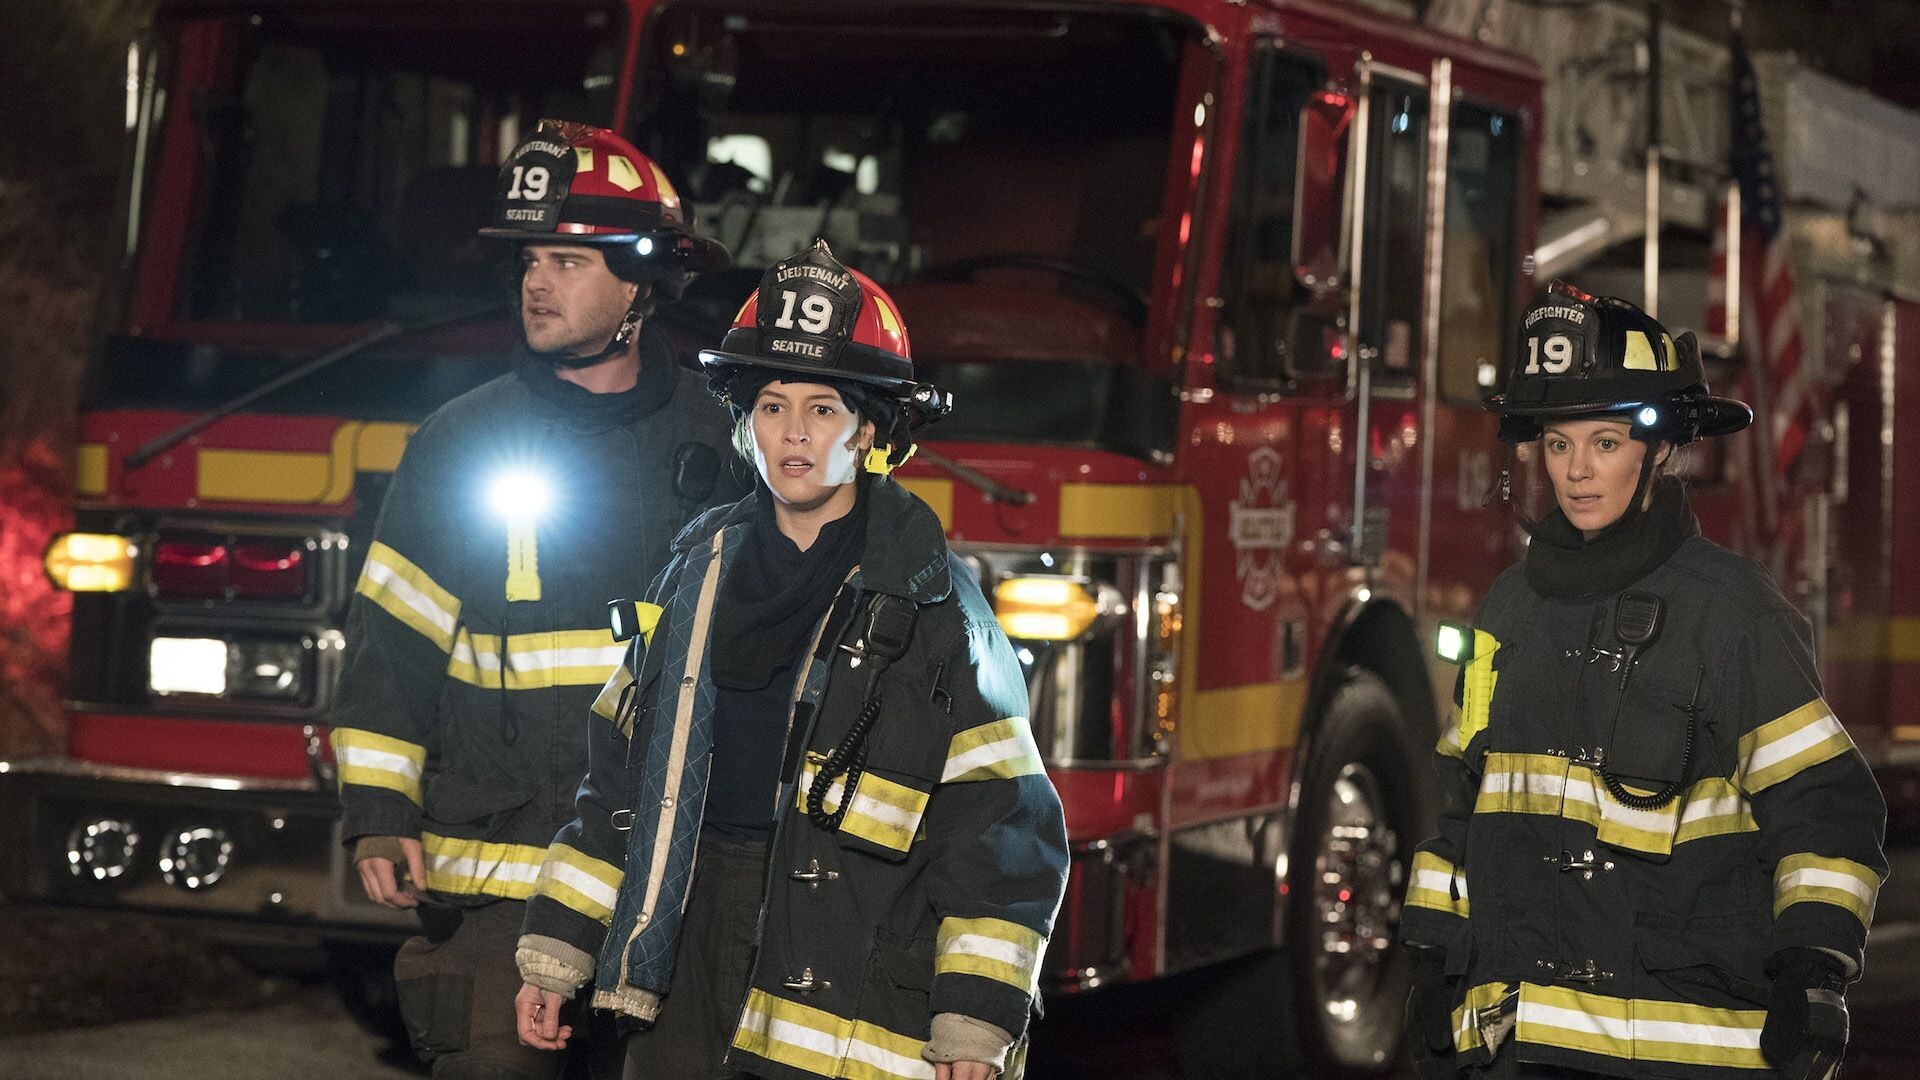 Station 19 wallpapers, Gripping emergencies, High-stakes rescues, Teamwork and bravery, 1920x1080 Full HD Desktop